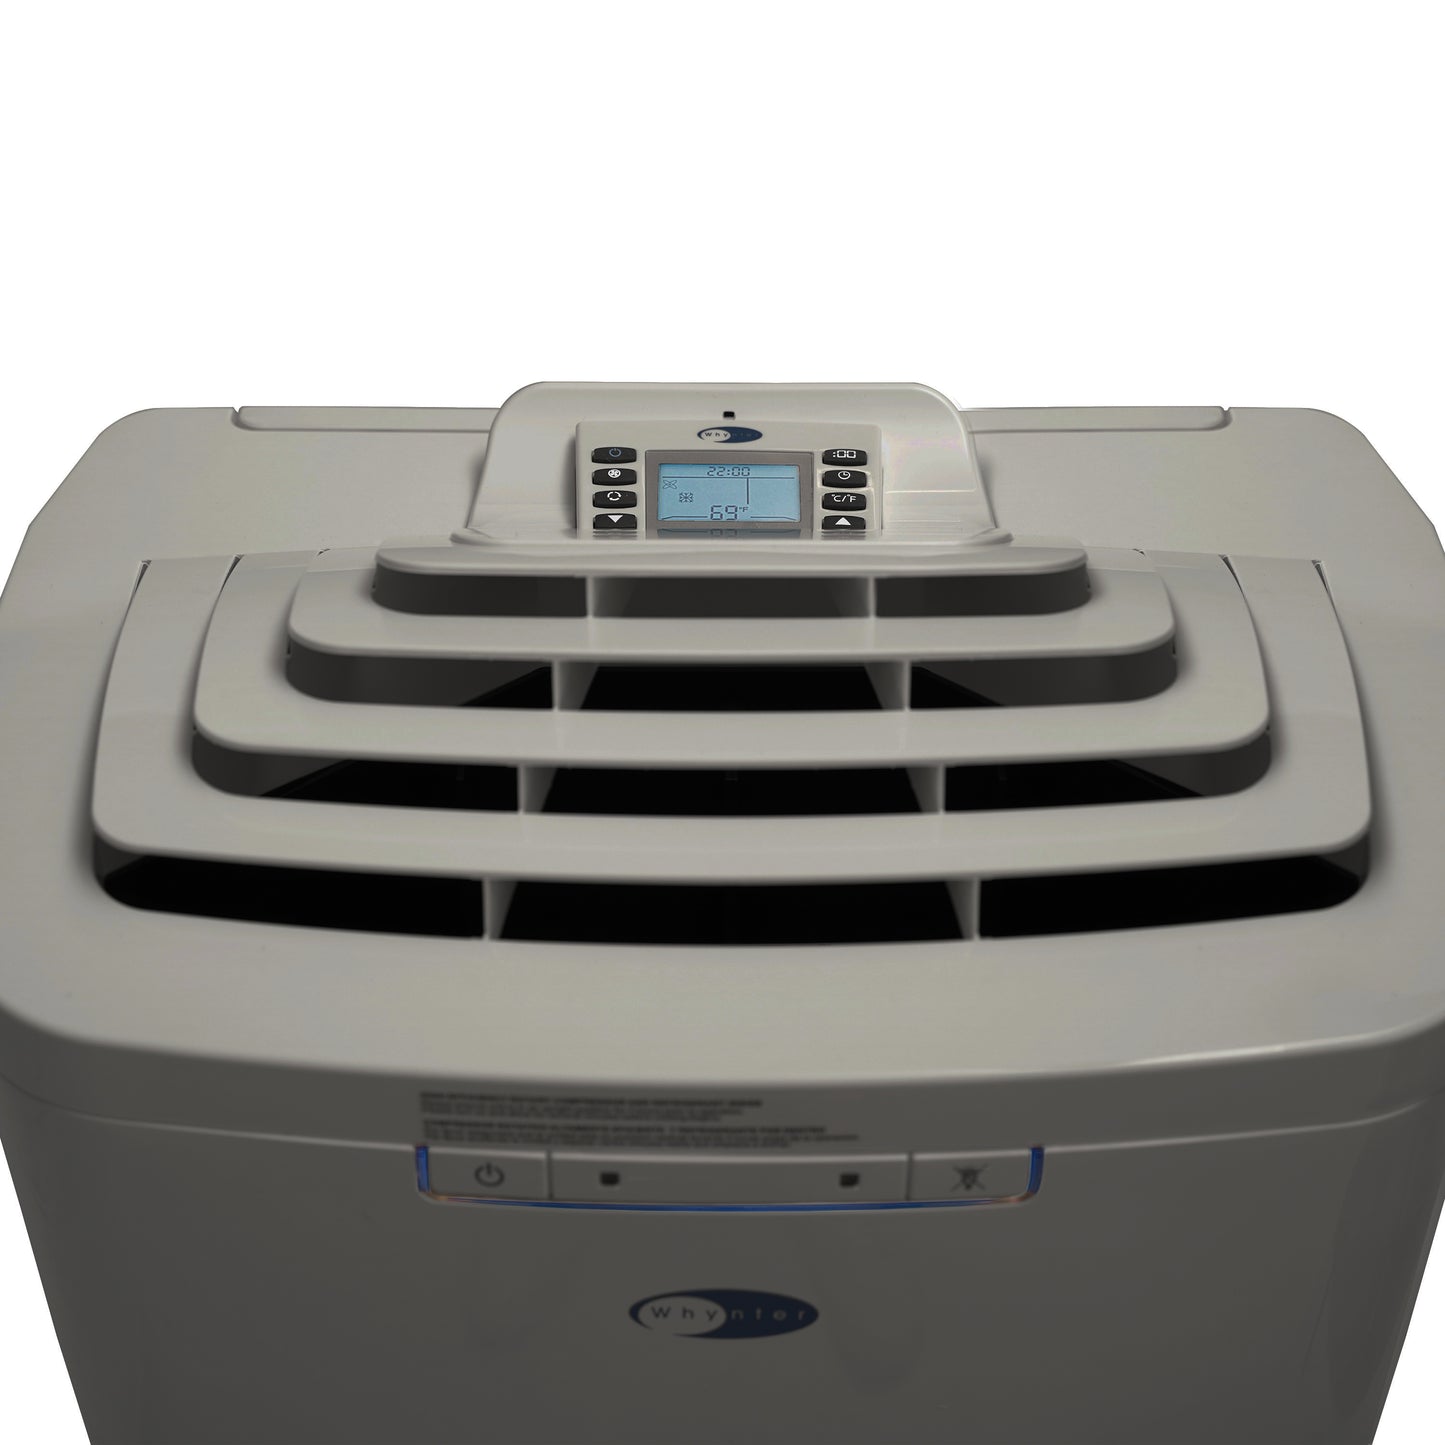 Buy a Whynter Eco-Friendly 13,000 BTU 420 sq ft Dual Hose Portable Air Conditioner with Activated Carbon Filter by Chilled Beverages